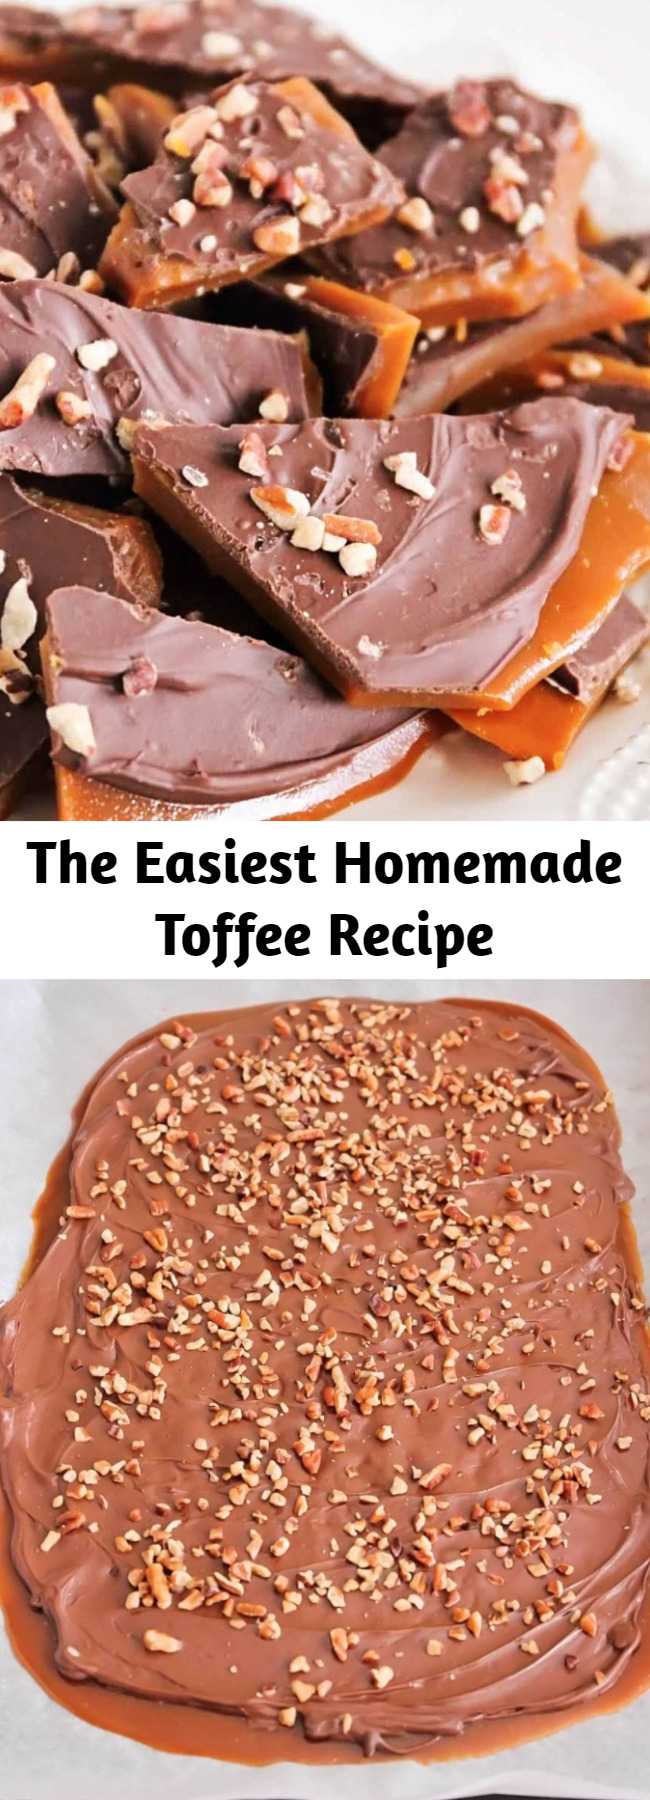 The Easiest Homemade Toffee Recipe - This rich and buttery toffee takes only thirty minutes to make and is super easy, too! Perfect for parties, holiday gifts, and snacking! #toffee #candy #desserts #holidays #christmas #howtomake